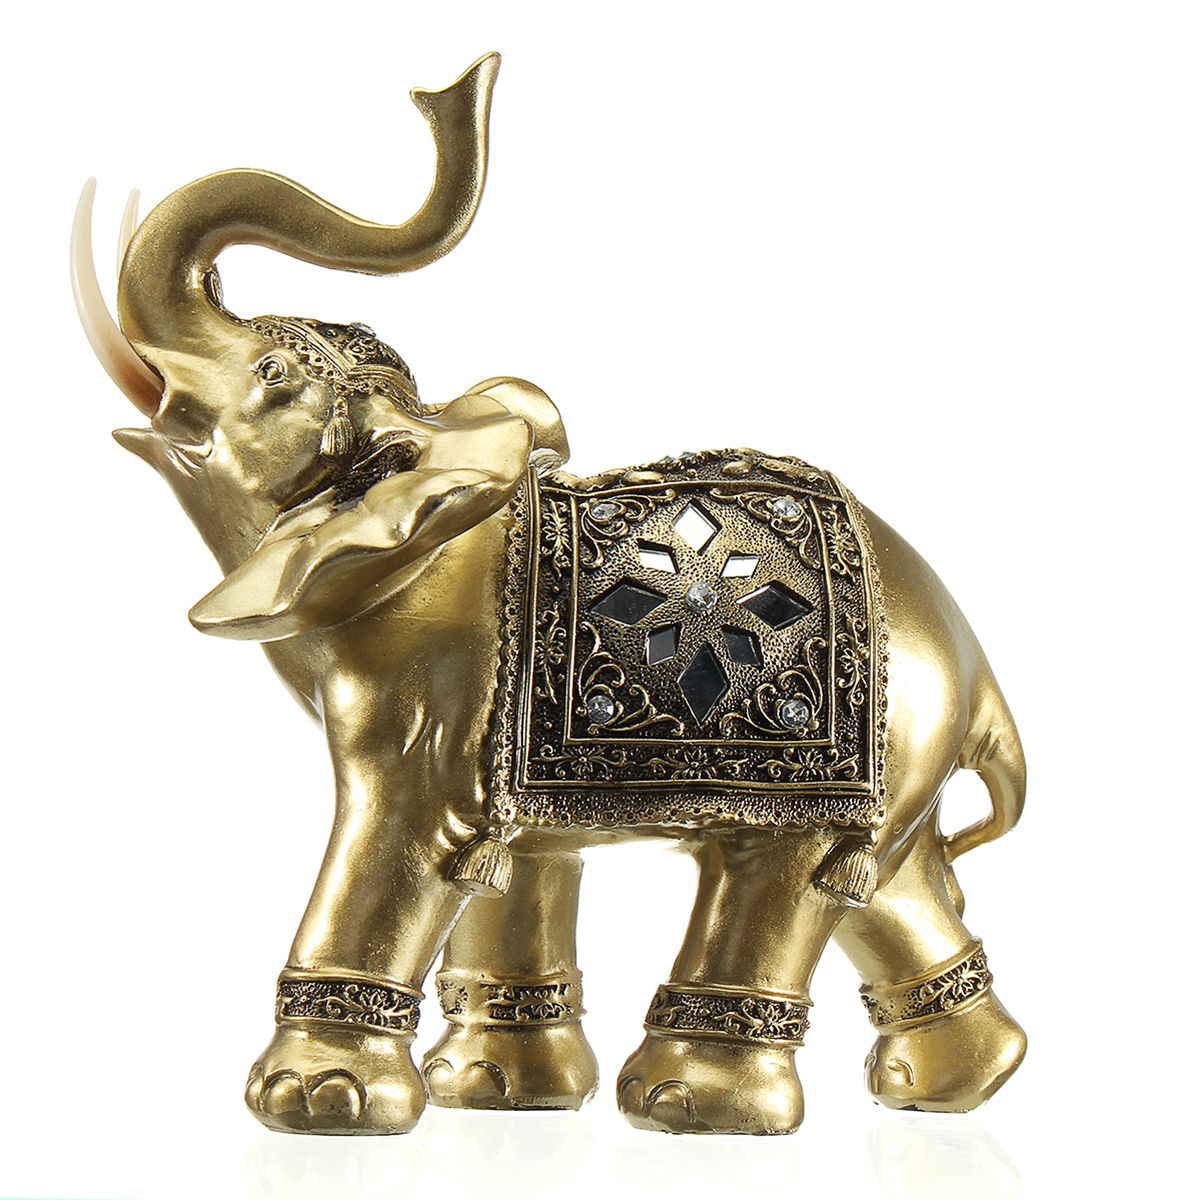 Lucky-Charm-Fengshui-Mascot-Golden-Elephant-Resin-Mini-Statue-Home-Desk-Ornaments-Gifts-Home-Decorat-1634232-7